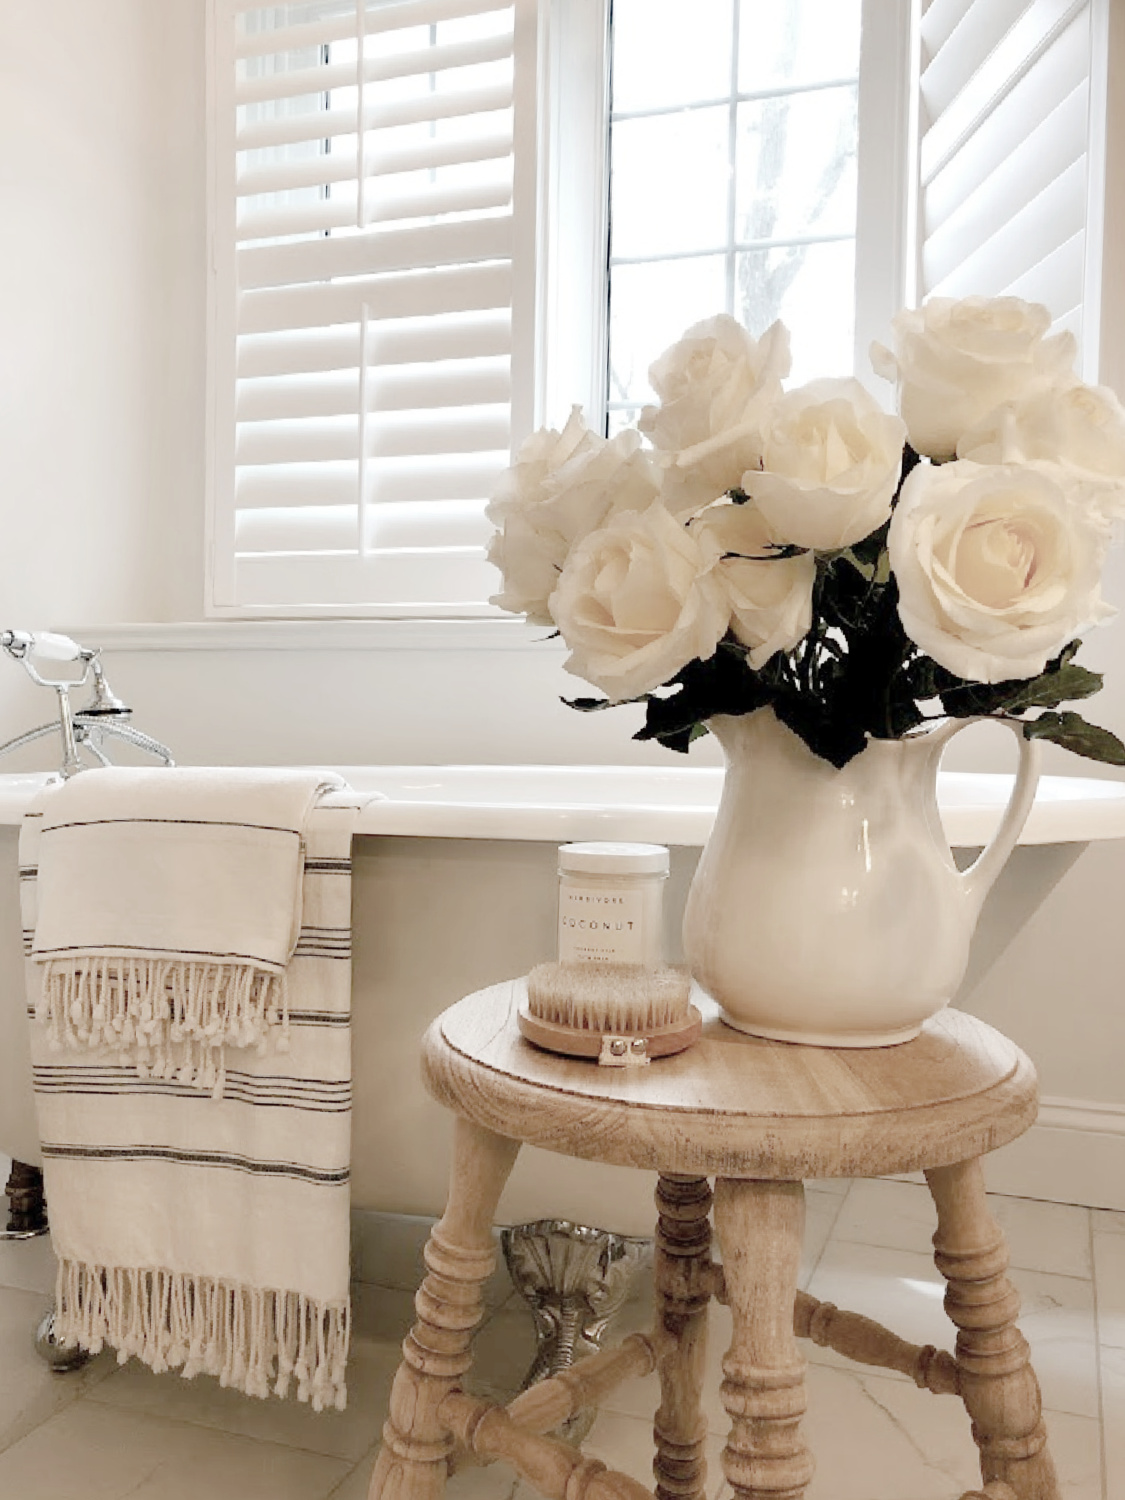 Hello Lovely's modern French bath with clawfoot tub and white roses. #modernfrench